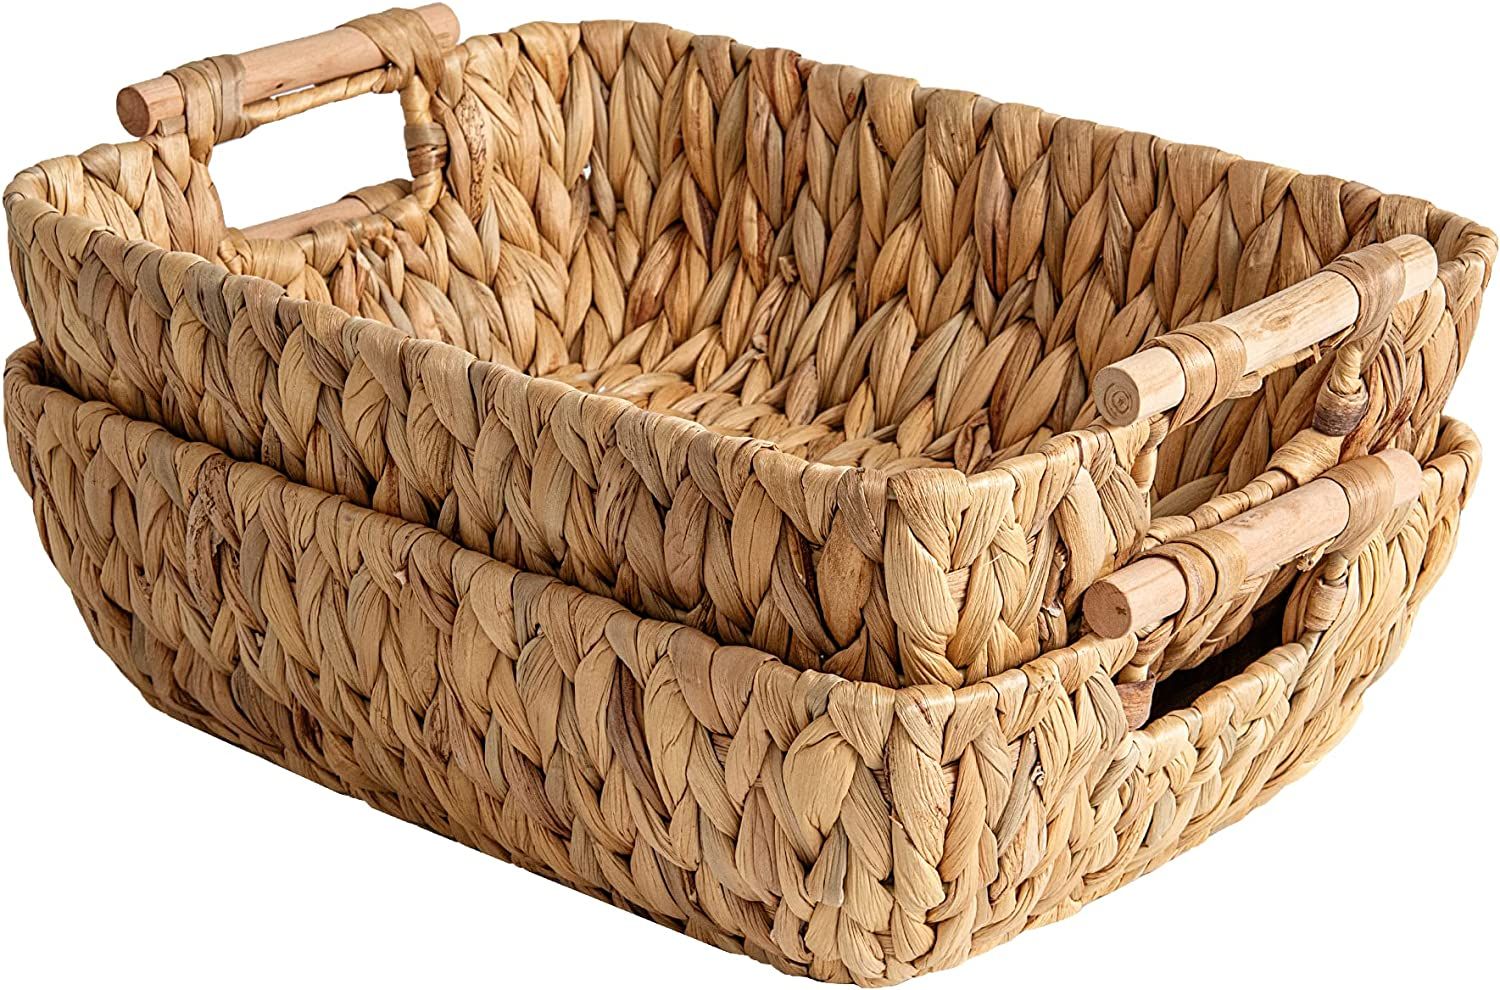 StorageWorks Hand-Woven Large Storage Baskets with Wooden Handles, Water Hyacinth Wicker Baskets ... | Amazon (US)